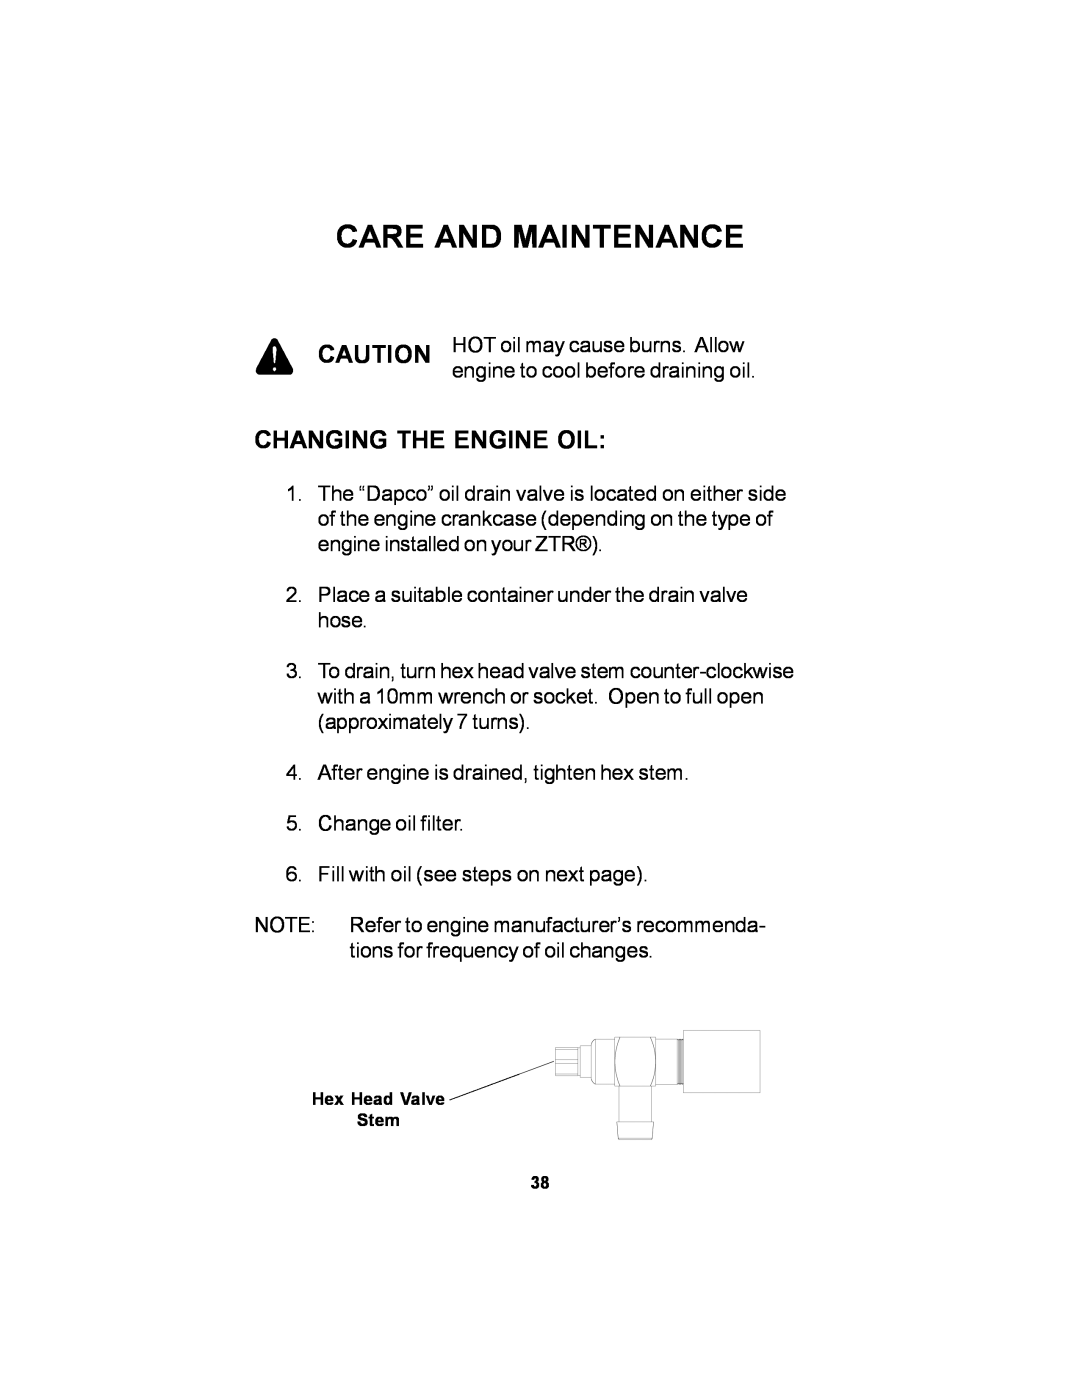 Dixon 12881-106 manual Changing The Engine Oil, Care And Maintenance 